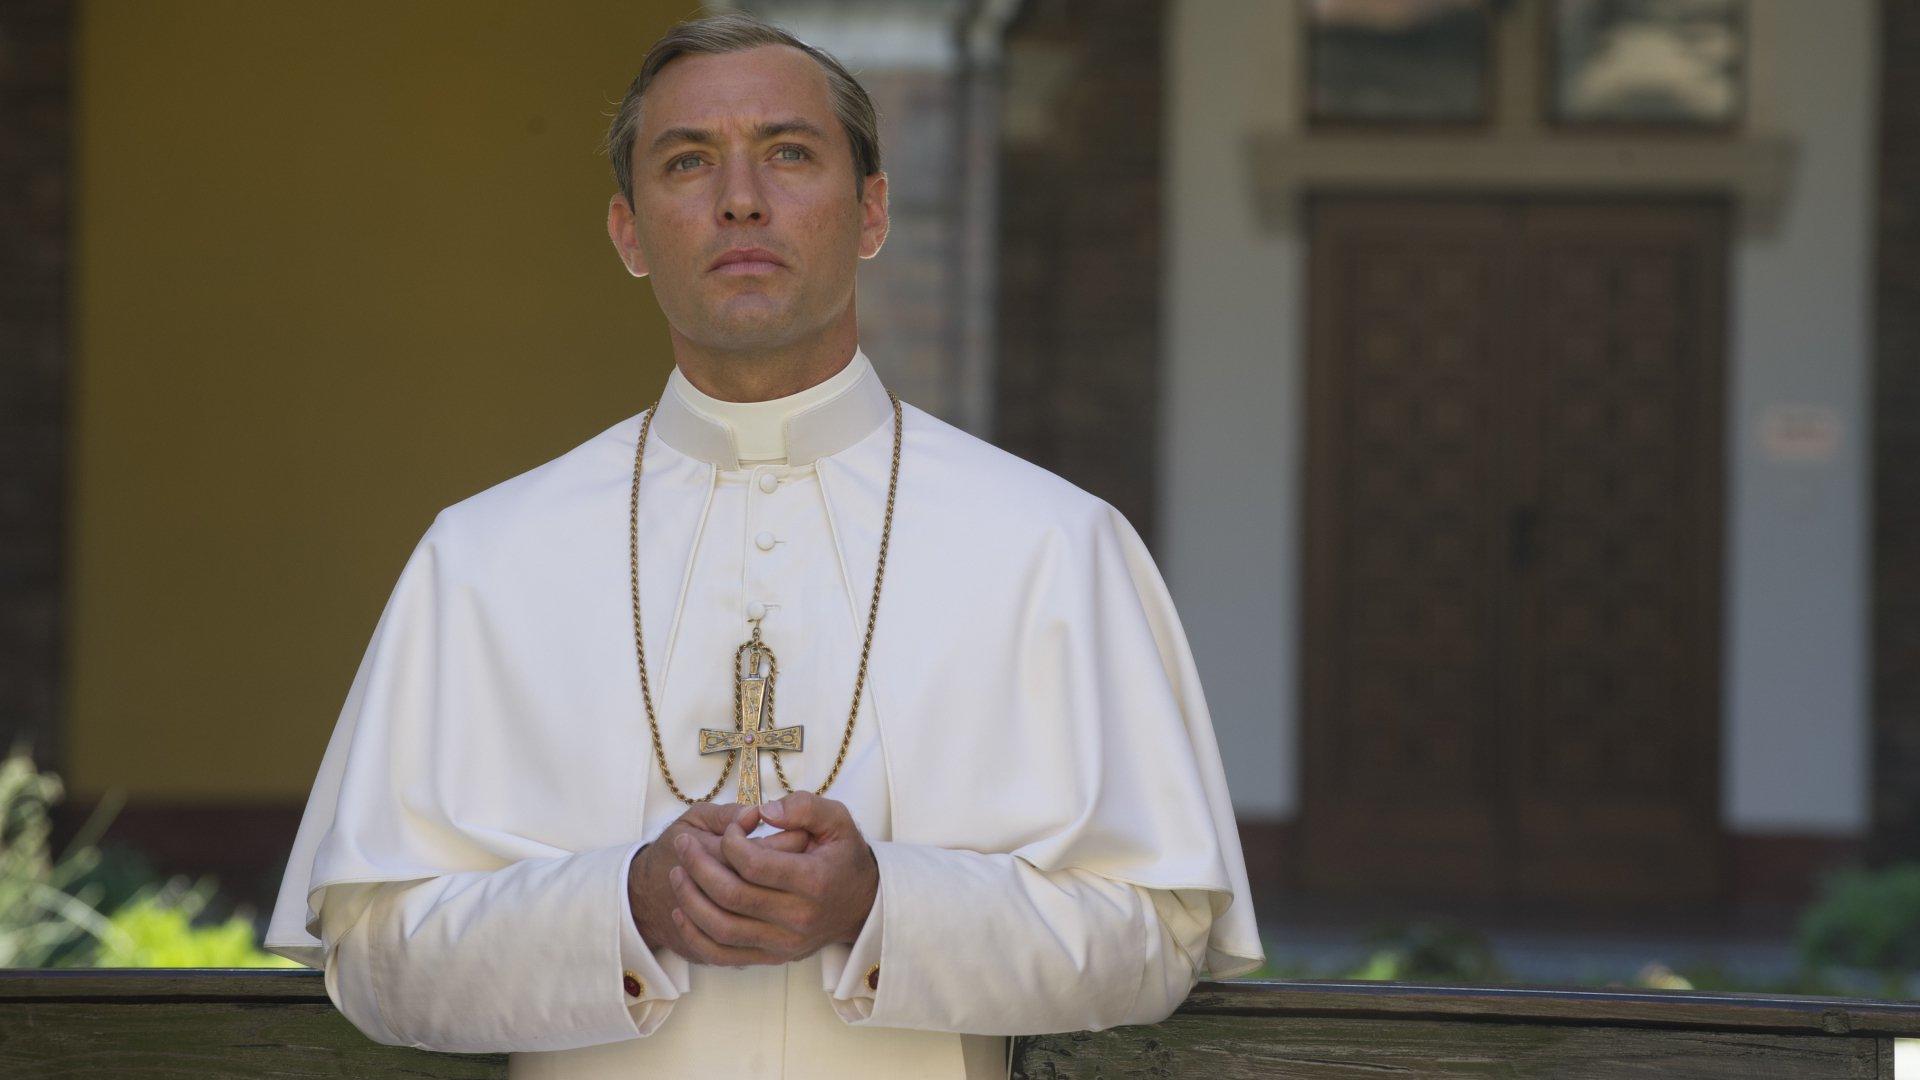 Beyond Hoge blootstelling Omgaan met The Young Pope (S01E05): Series 1, Episode 5 Summary - Season 1 Episode 5  Guide